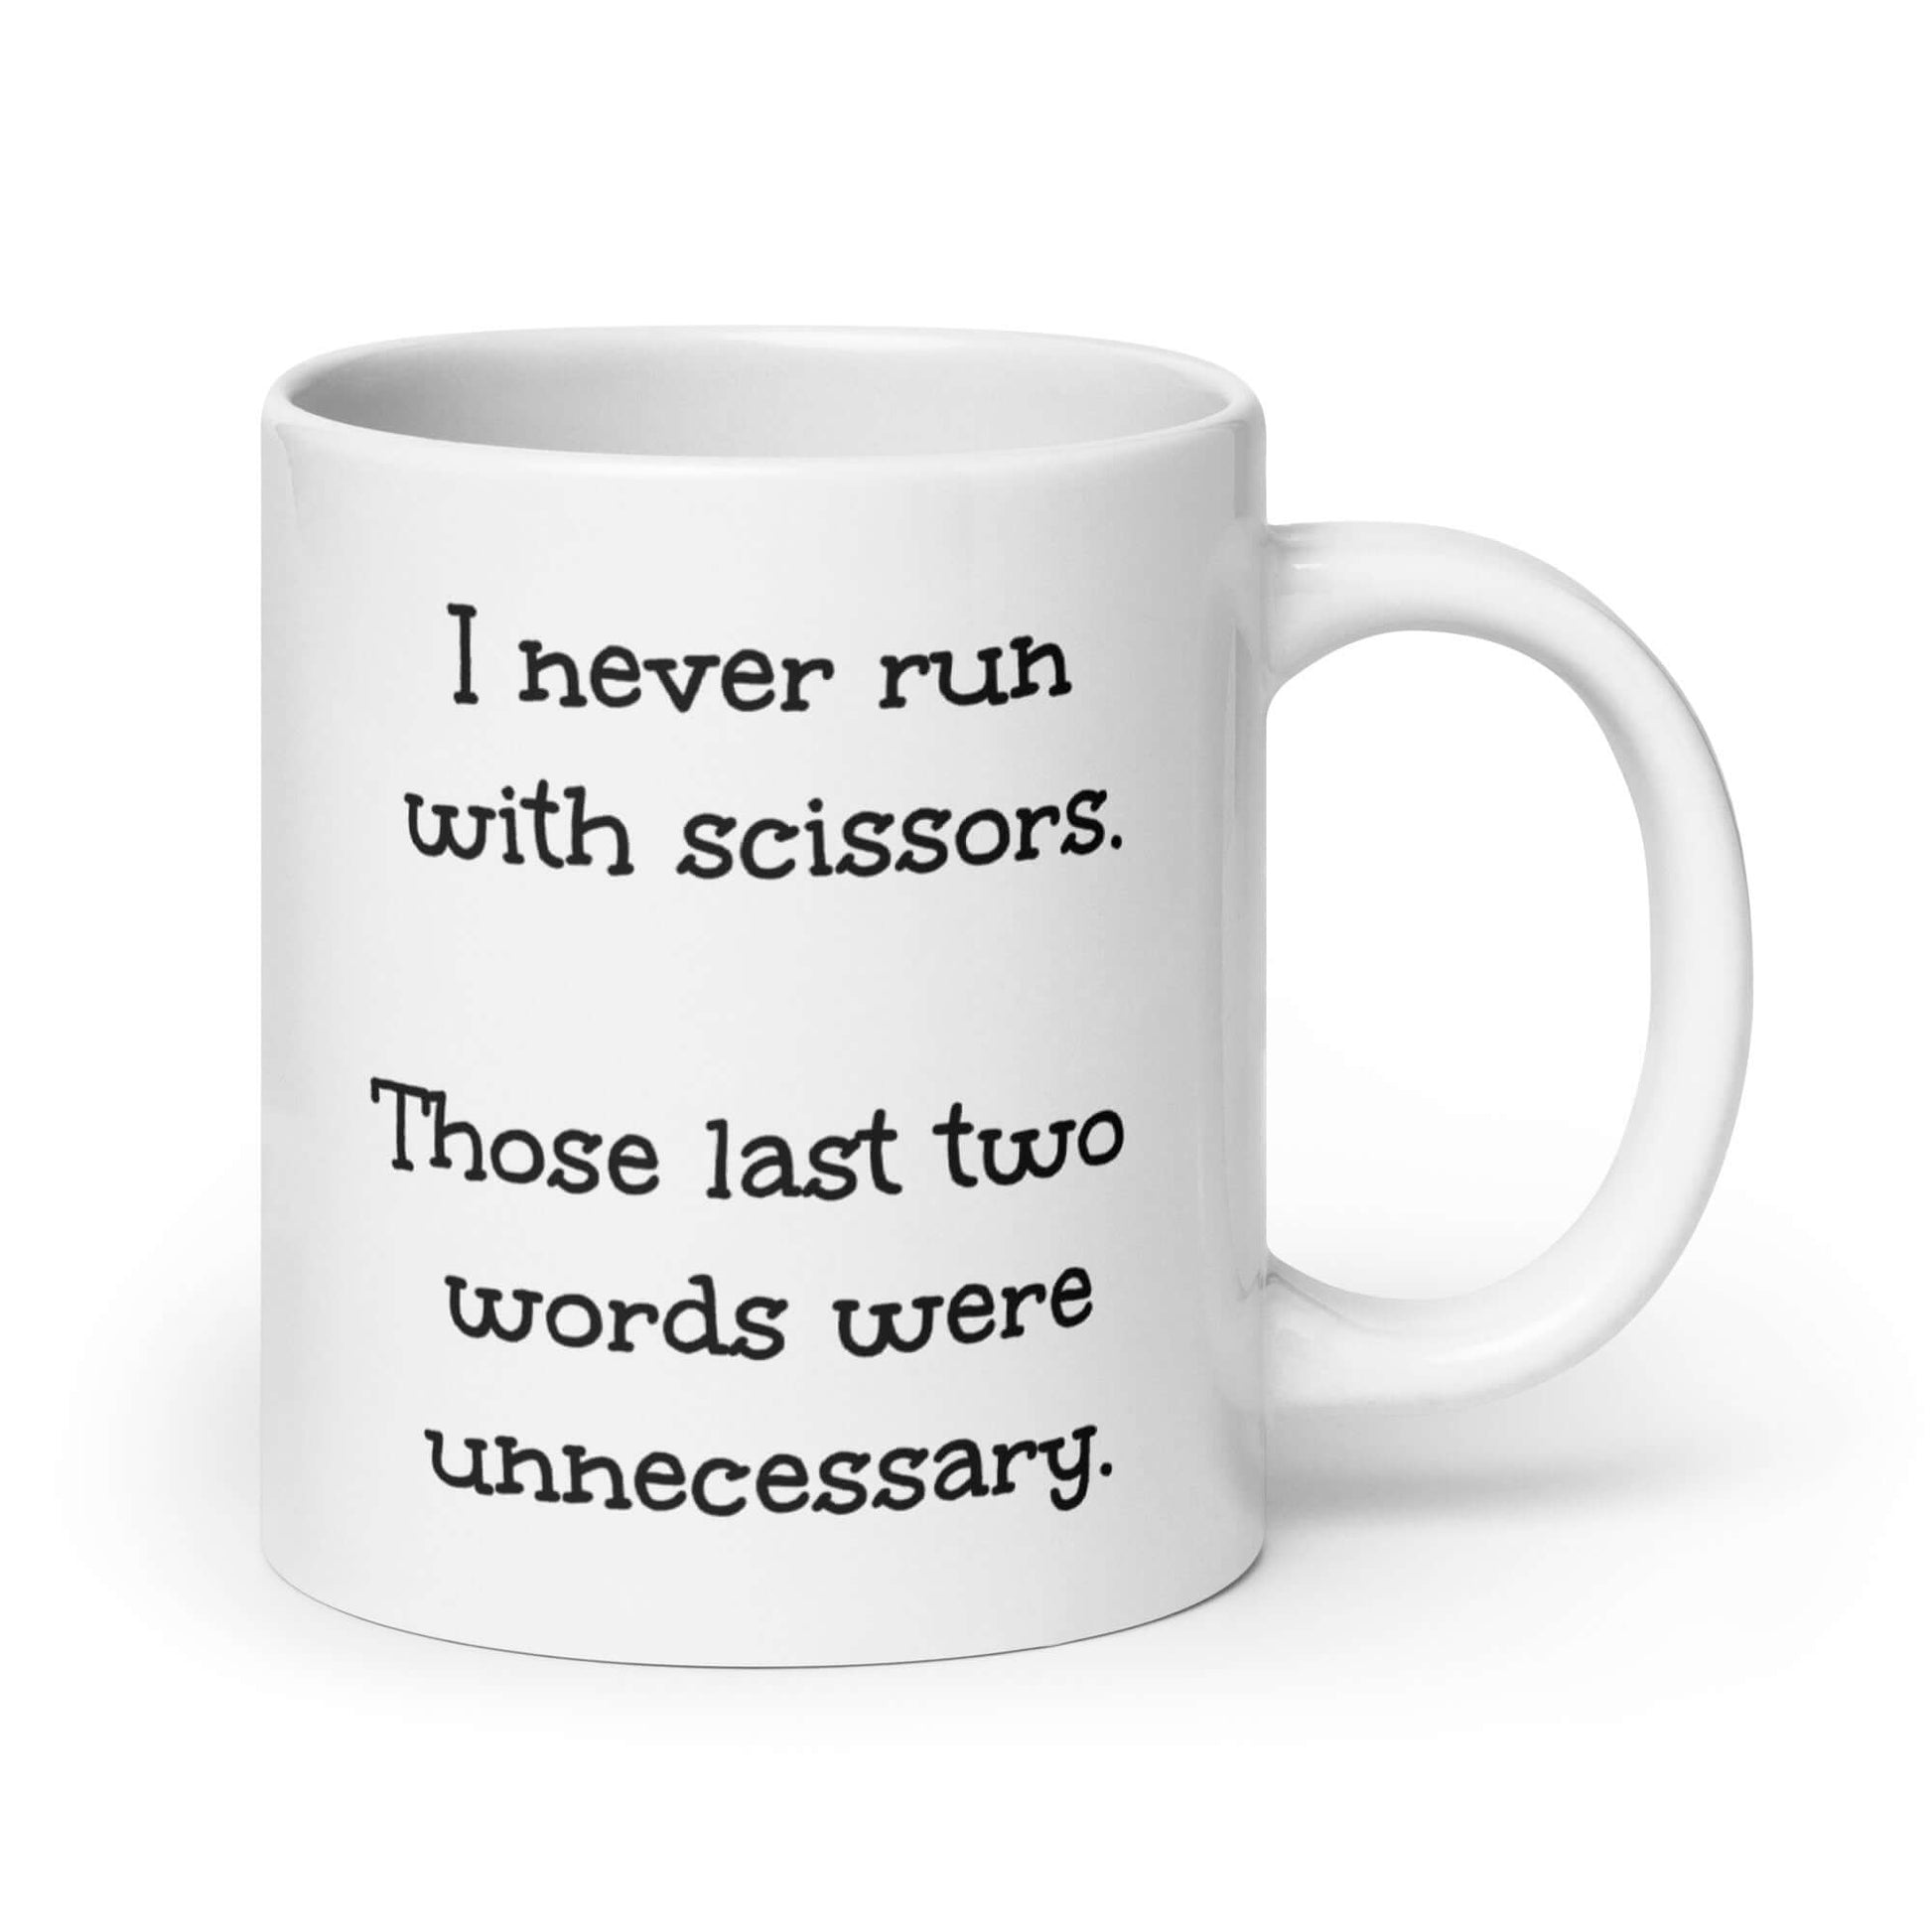 White ceramic coffee mug with the funny phrase I never run with scissors, those last two words were unnecessary printed on both sides of the mug.